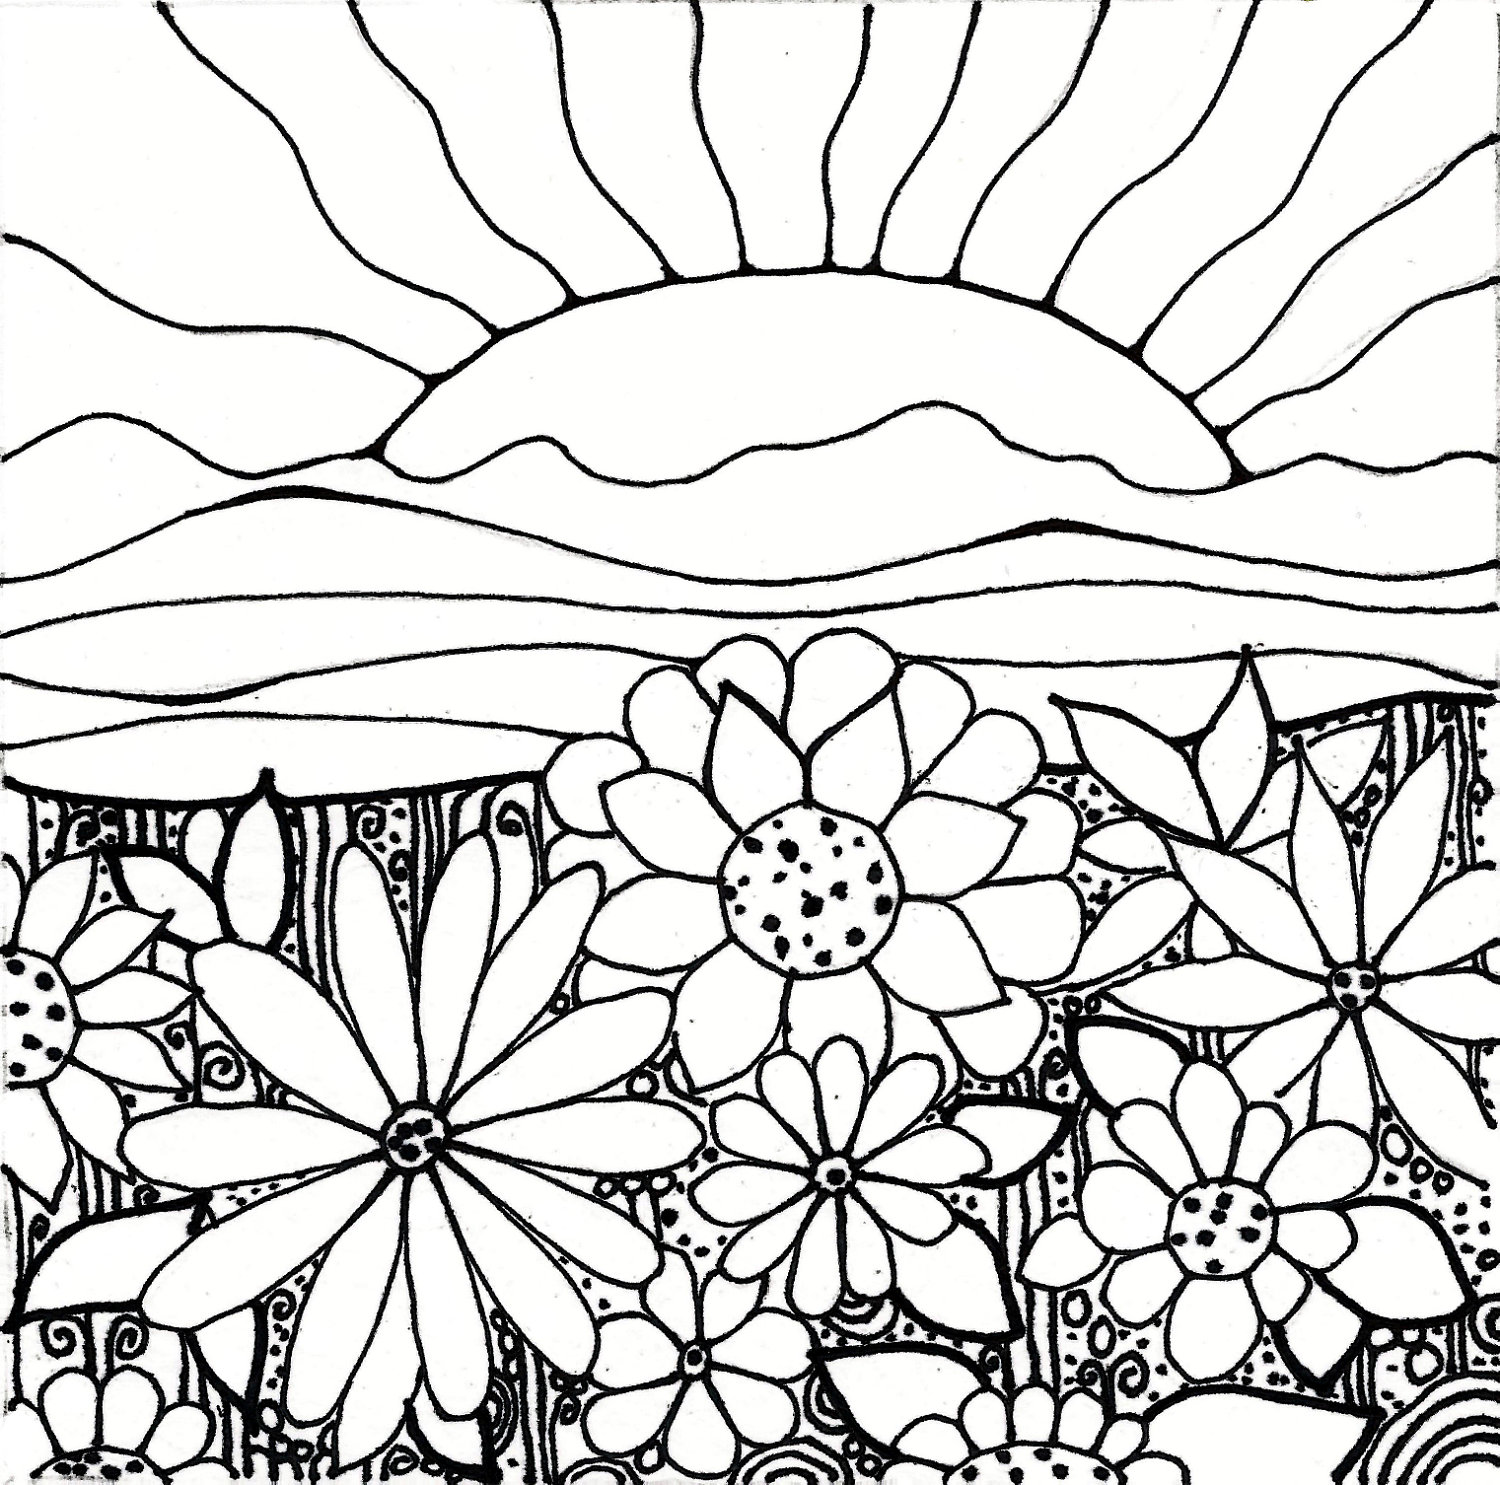 Sunset coloring #8, Download drawings